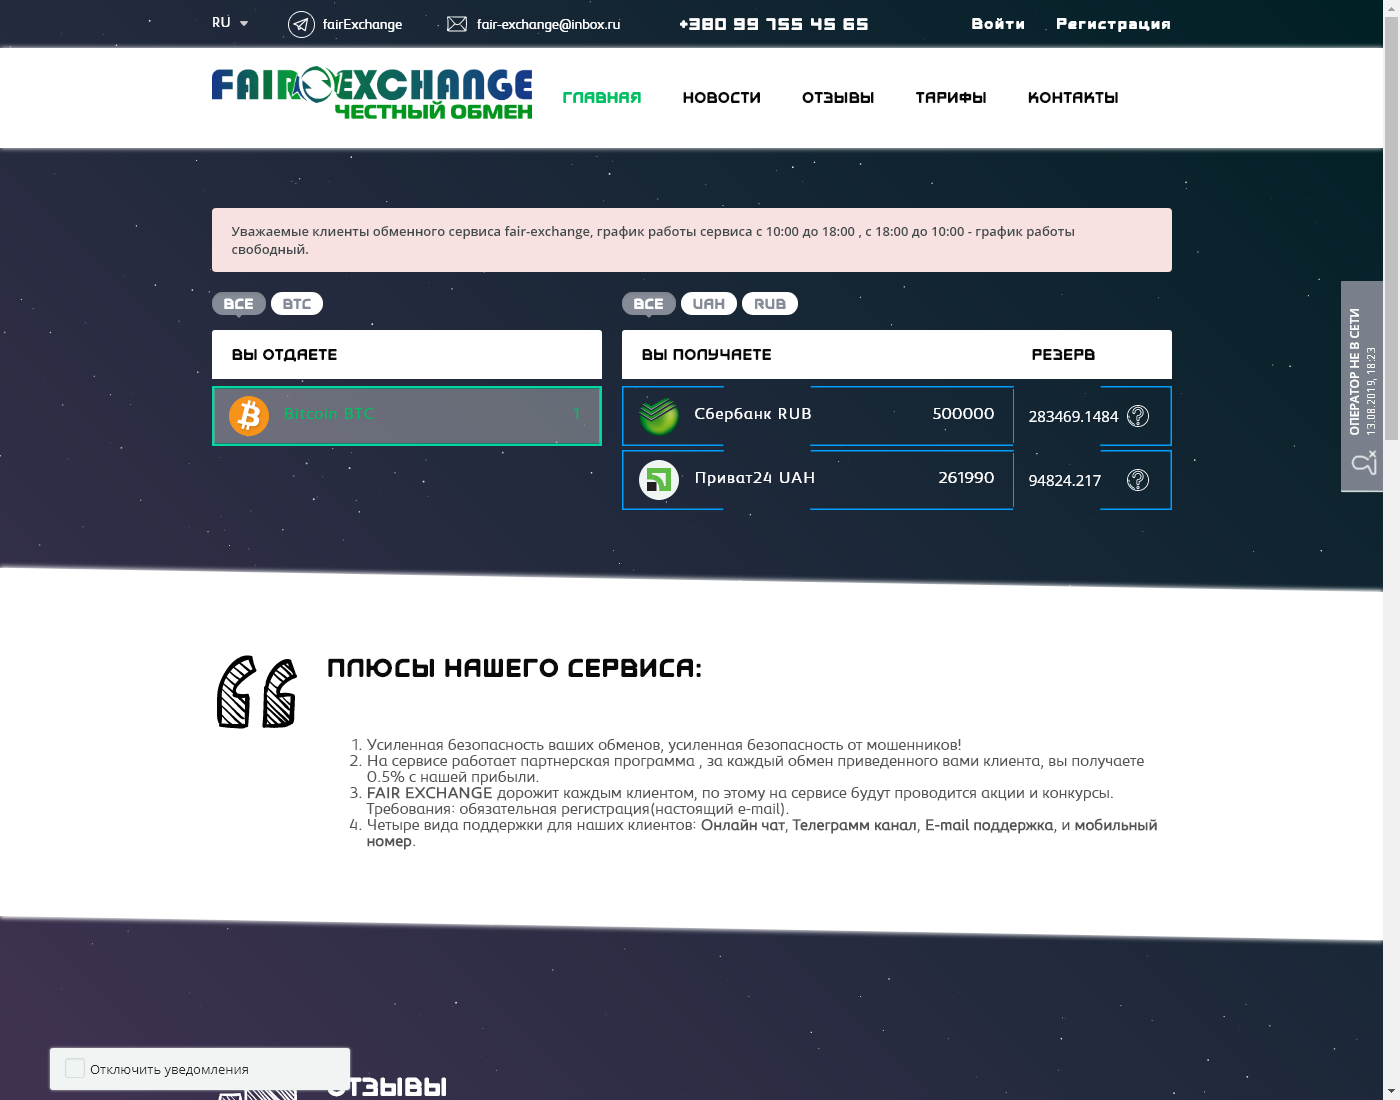 FairChange user interface: the home page in English